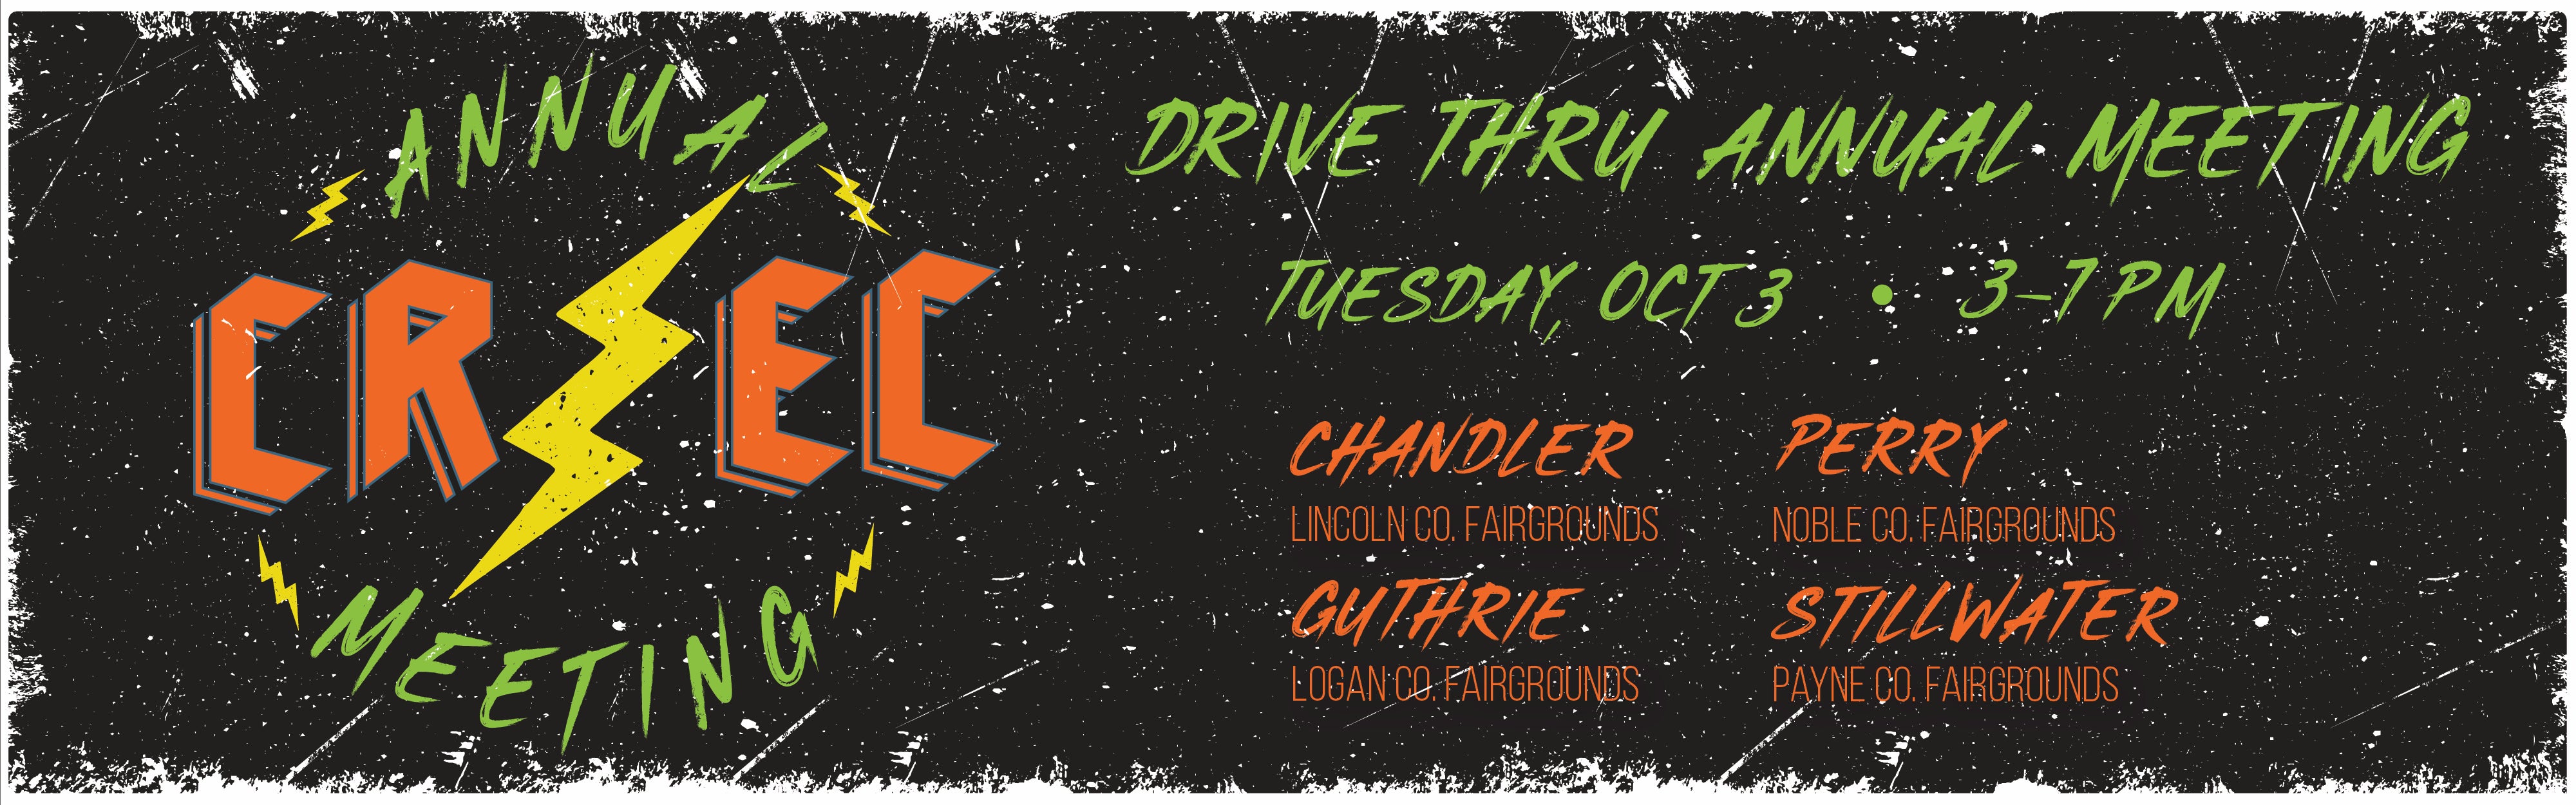 CREC Annual Meeting Drive Thru Annual Meeting Tuesday, October 3rd from 3 to 7 p.m. Chandler, Perry, Guthrie and Stillwater